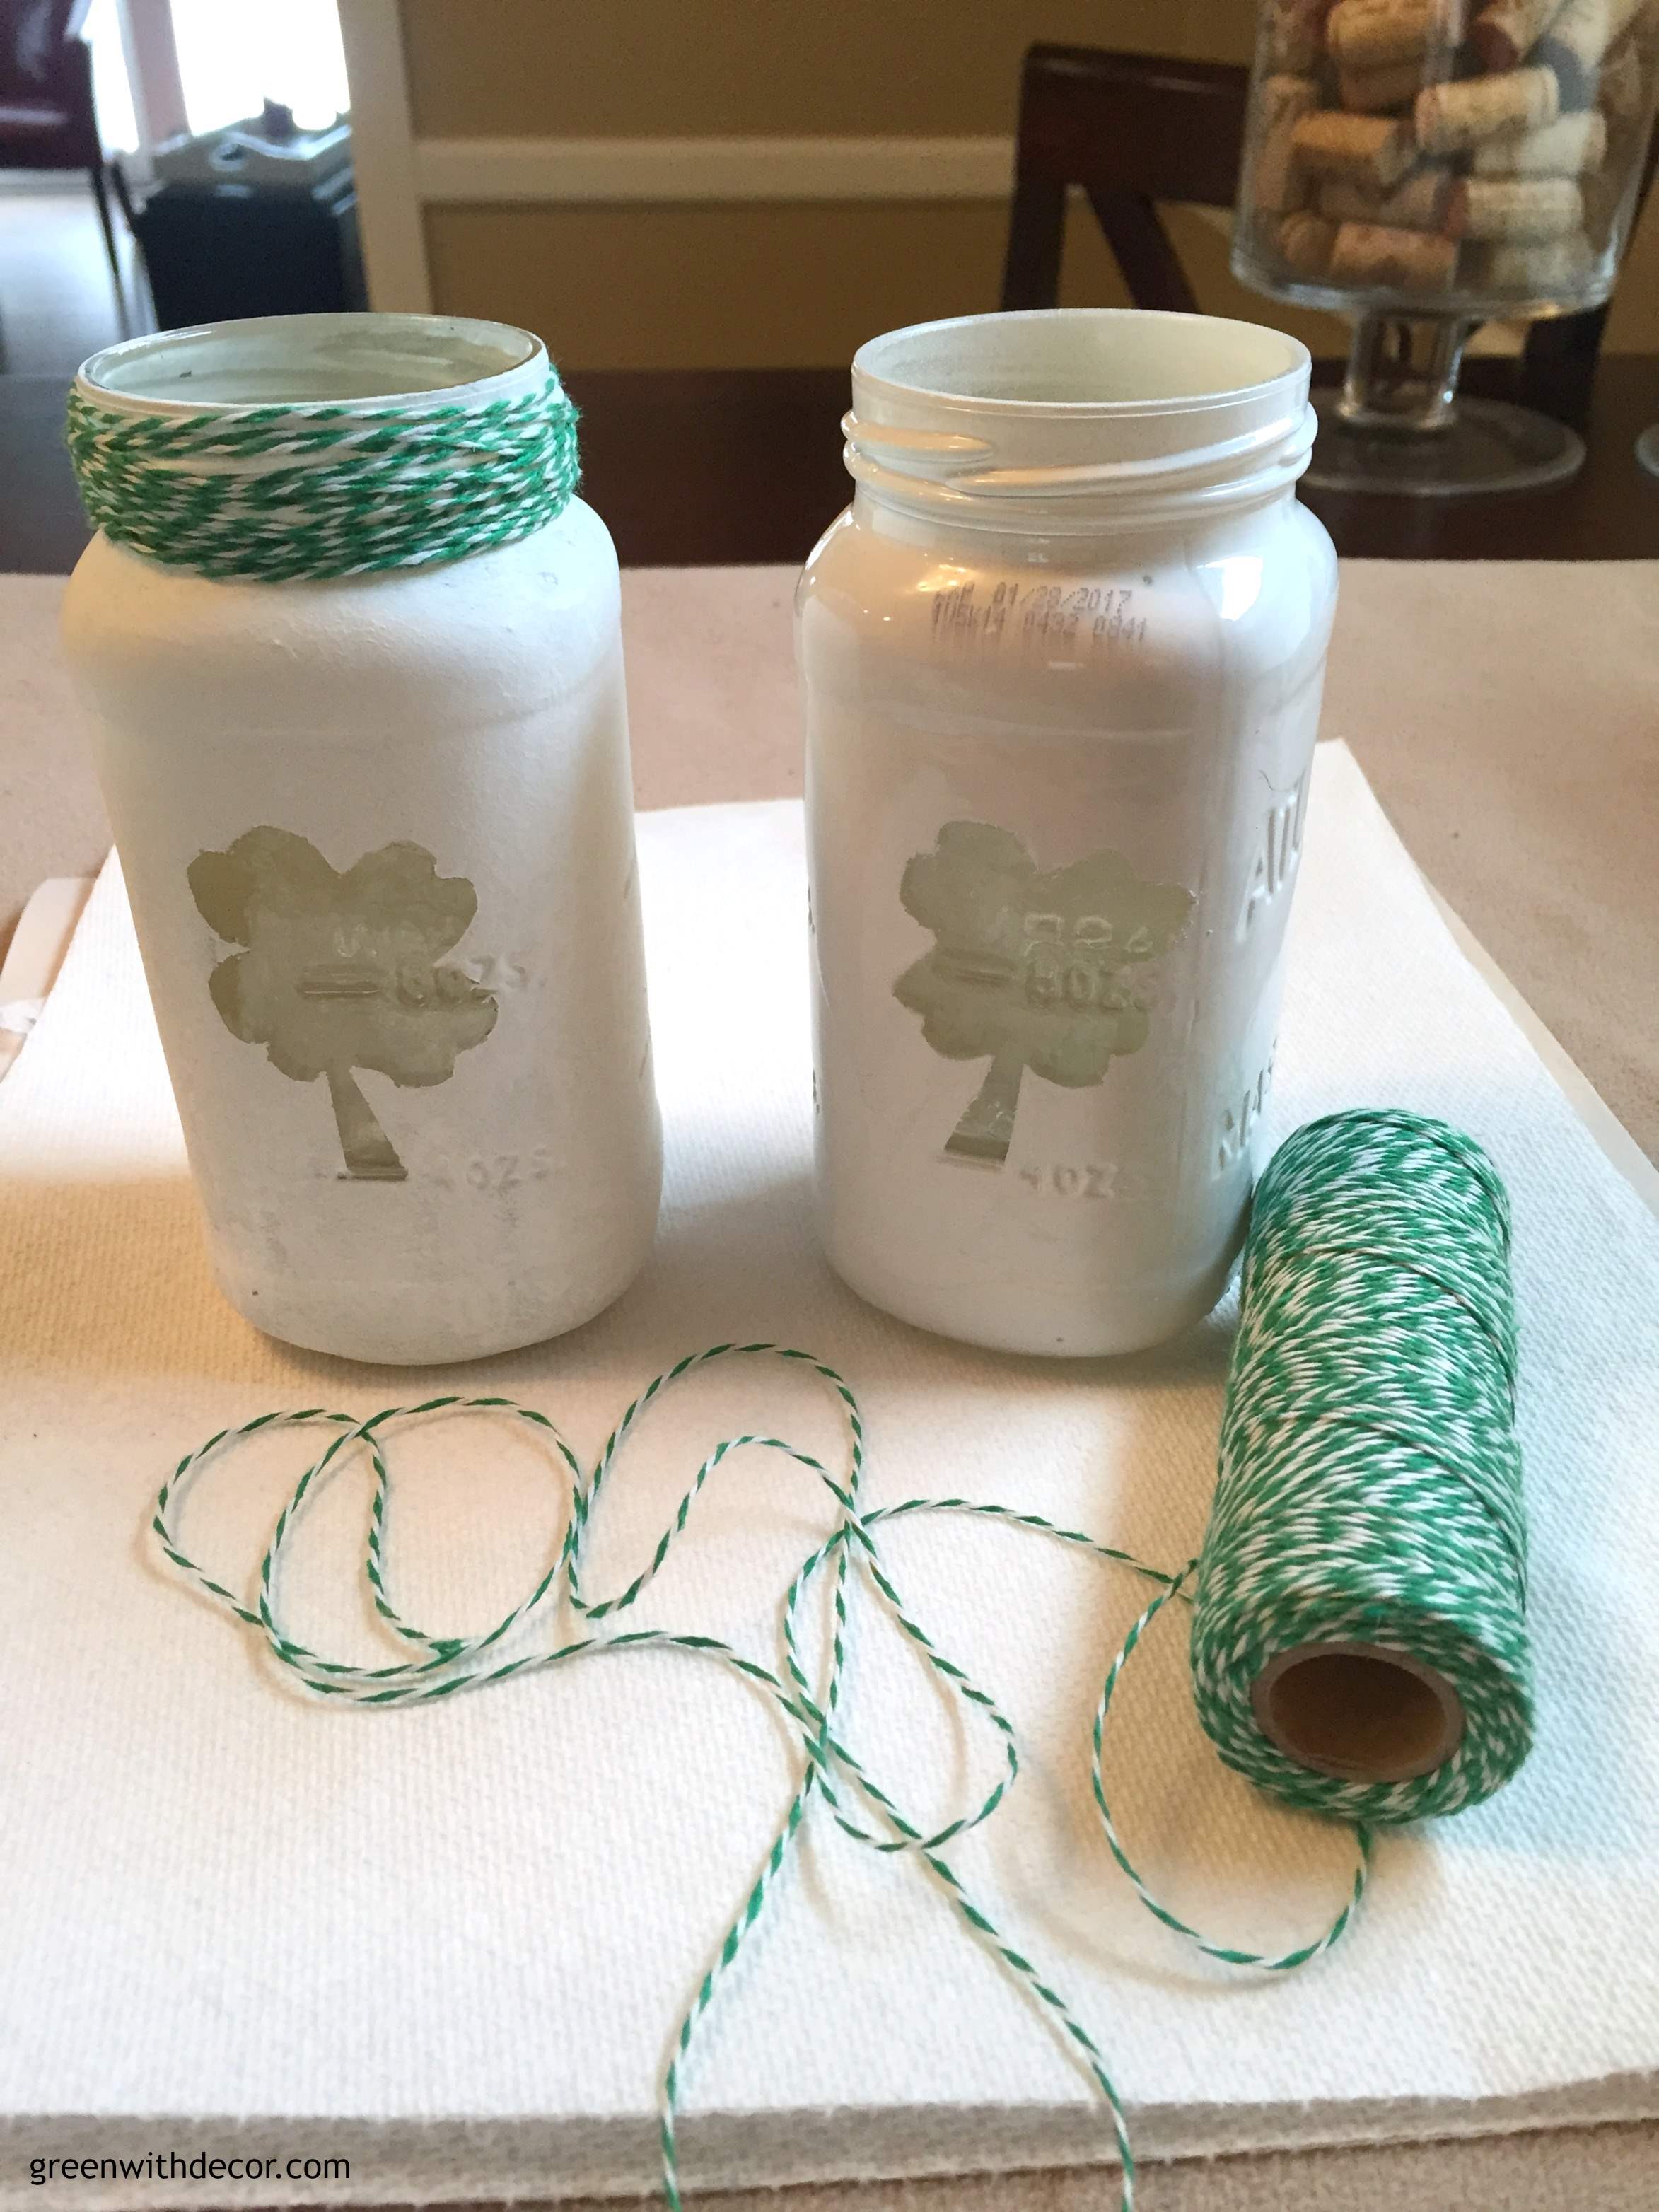 A fun St. Patrick’s Day craft with Mason jars. How cute are these? And she used old spaghetti jars instead of Mason jars, what a great idea! | Green With Decor 